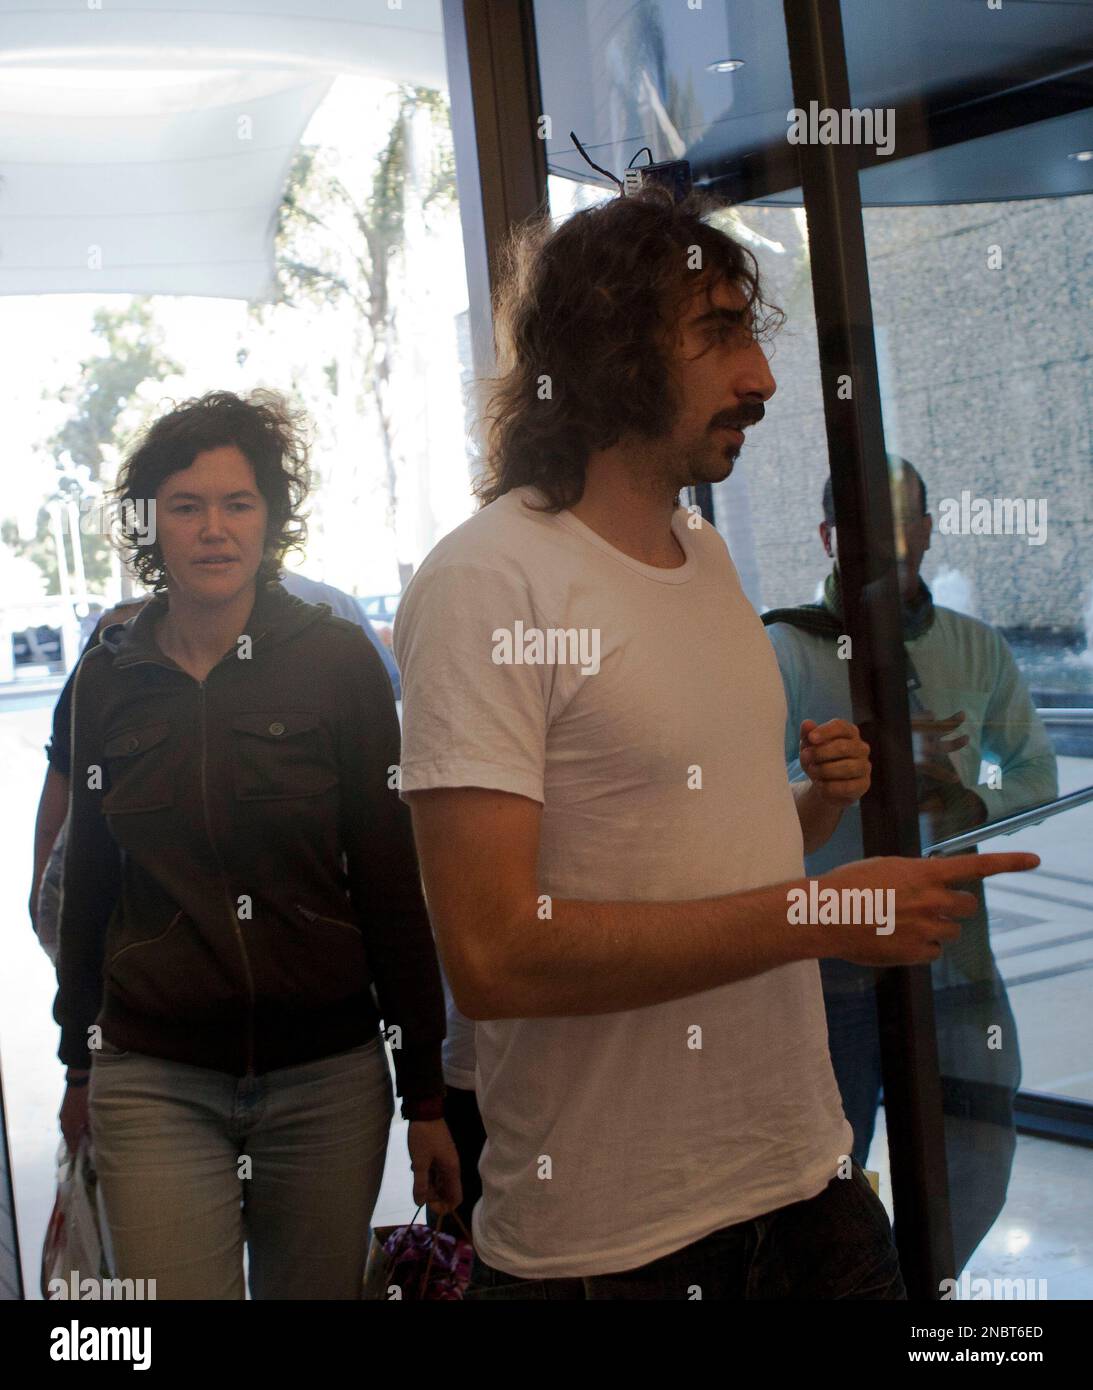 Freed American freelance journalist Clare Morgana Gillis, left and Spanish  photographer Manu Brabo arrive to a hotel where most of international media  stays in Tripoli, Libya, Wednesday, May 18, 2011. Four journalists